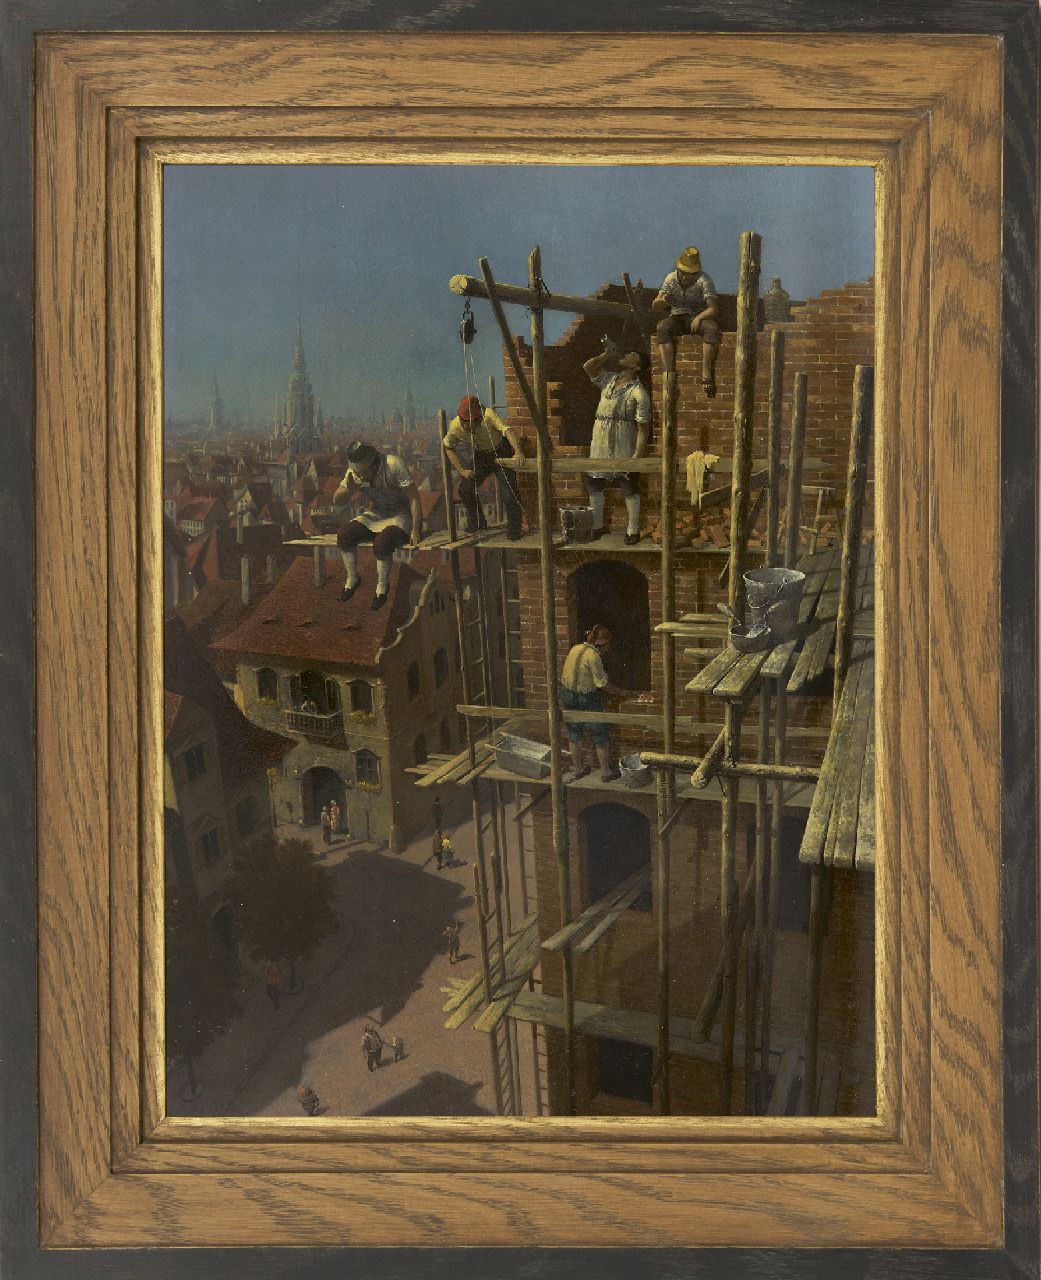 Gábor V.  | Vida Gábor | Paintings offered for sale | Construction site, oil on panel 45.7 x 30.7 cm, signed l.r. with initials